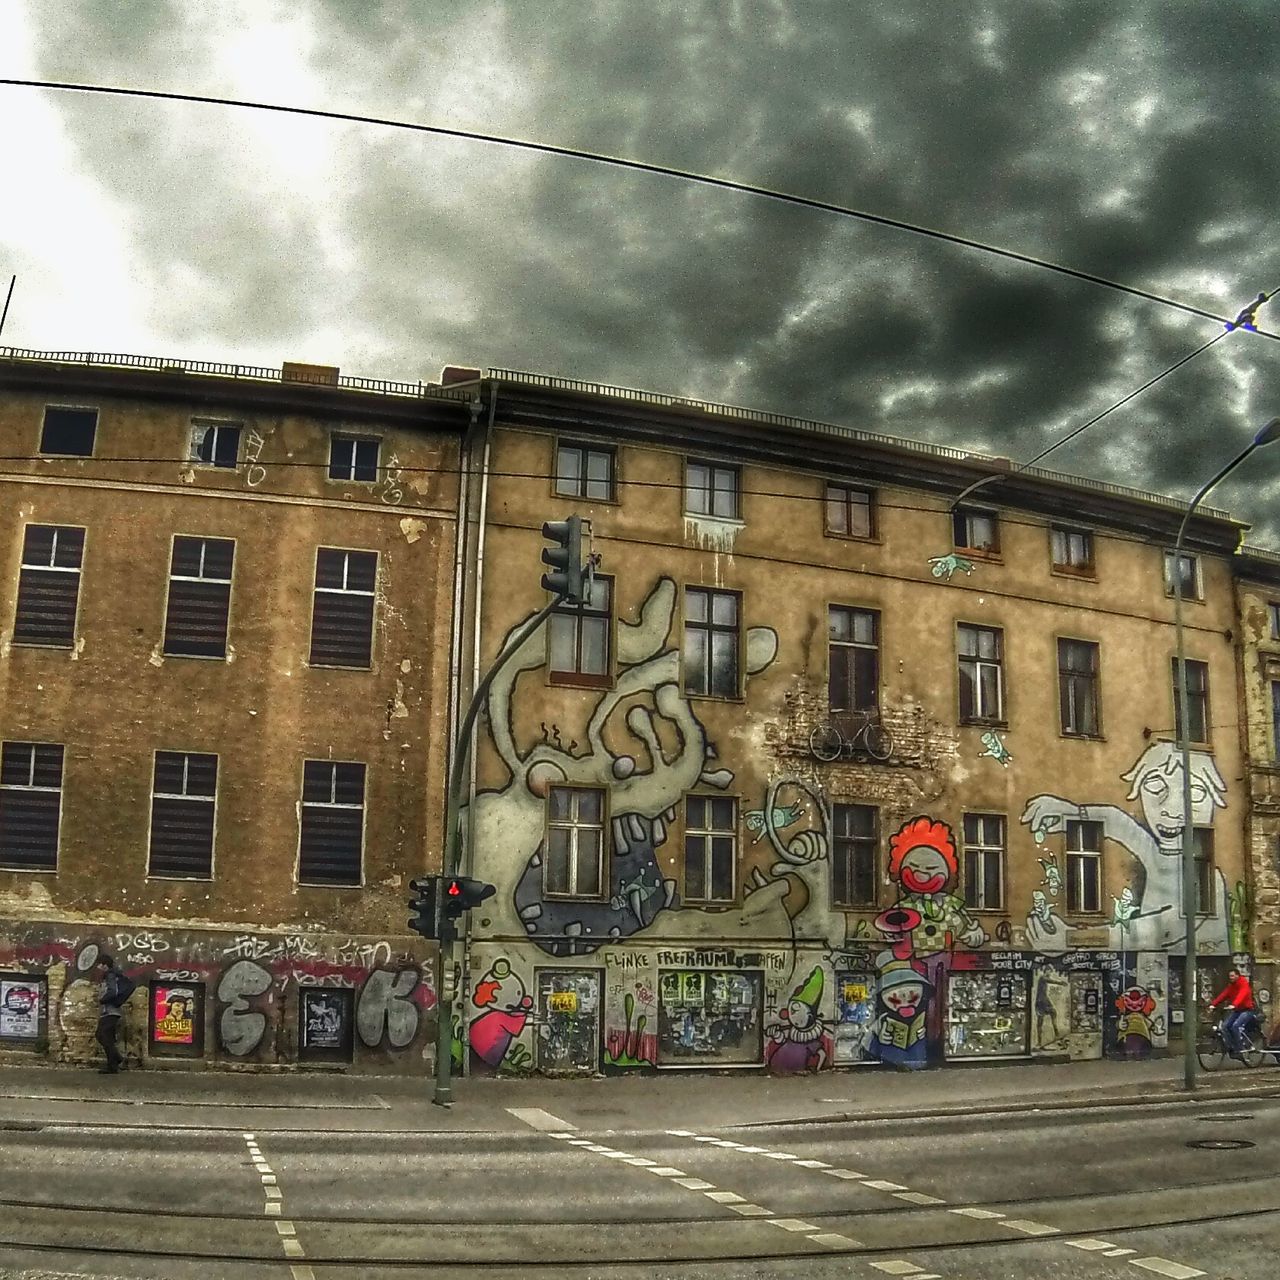 building exterior, architecture, built structure, sky, street, city, cloud - sky, transportation, graffiti, building, city life, road, art and craft, city street, art, cloudy, land vehicle, incidental people, outdoors, cloud